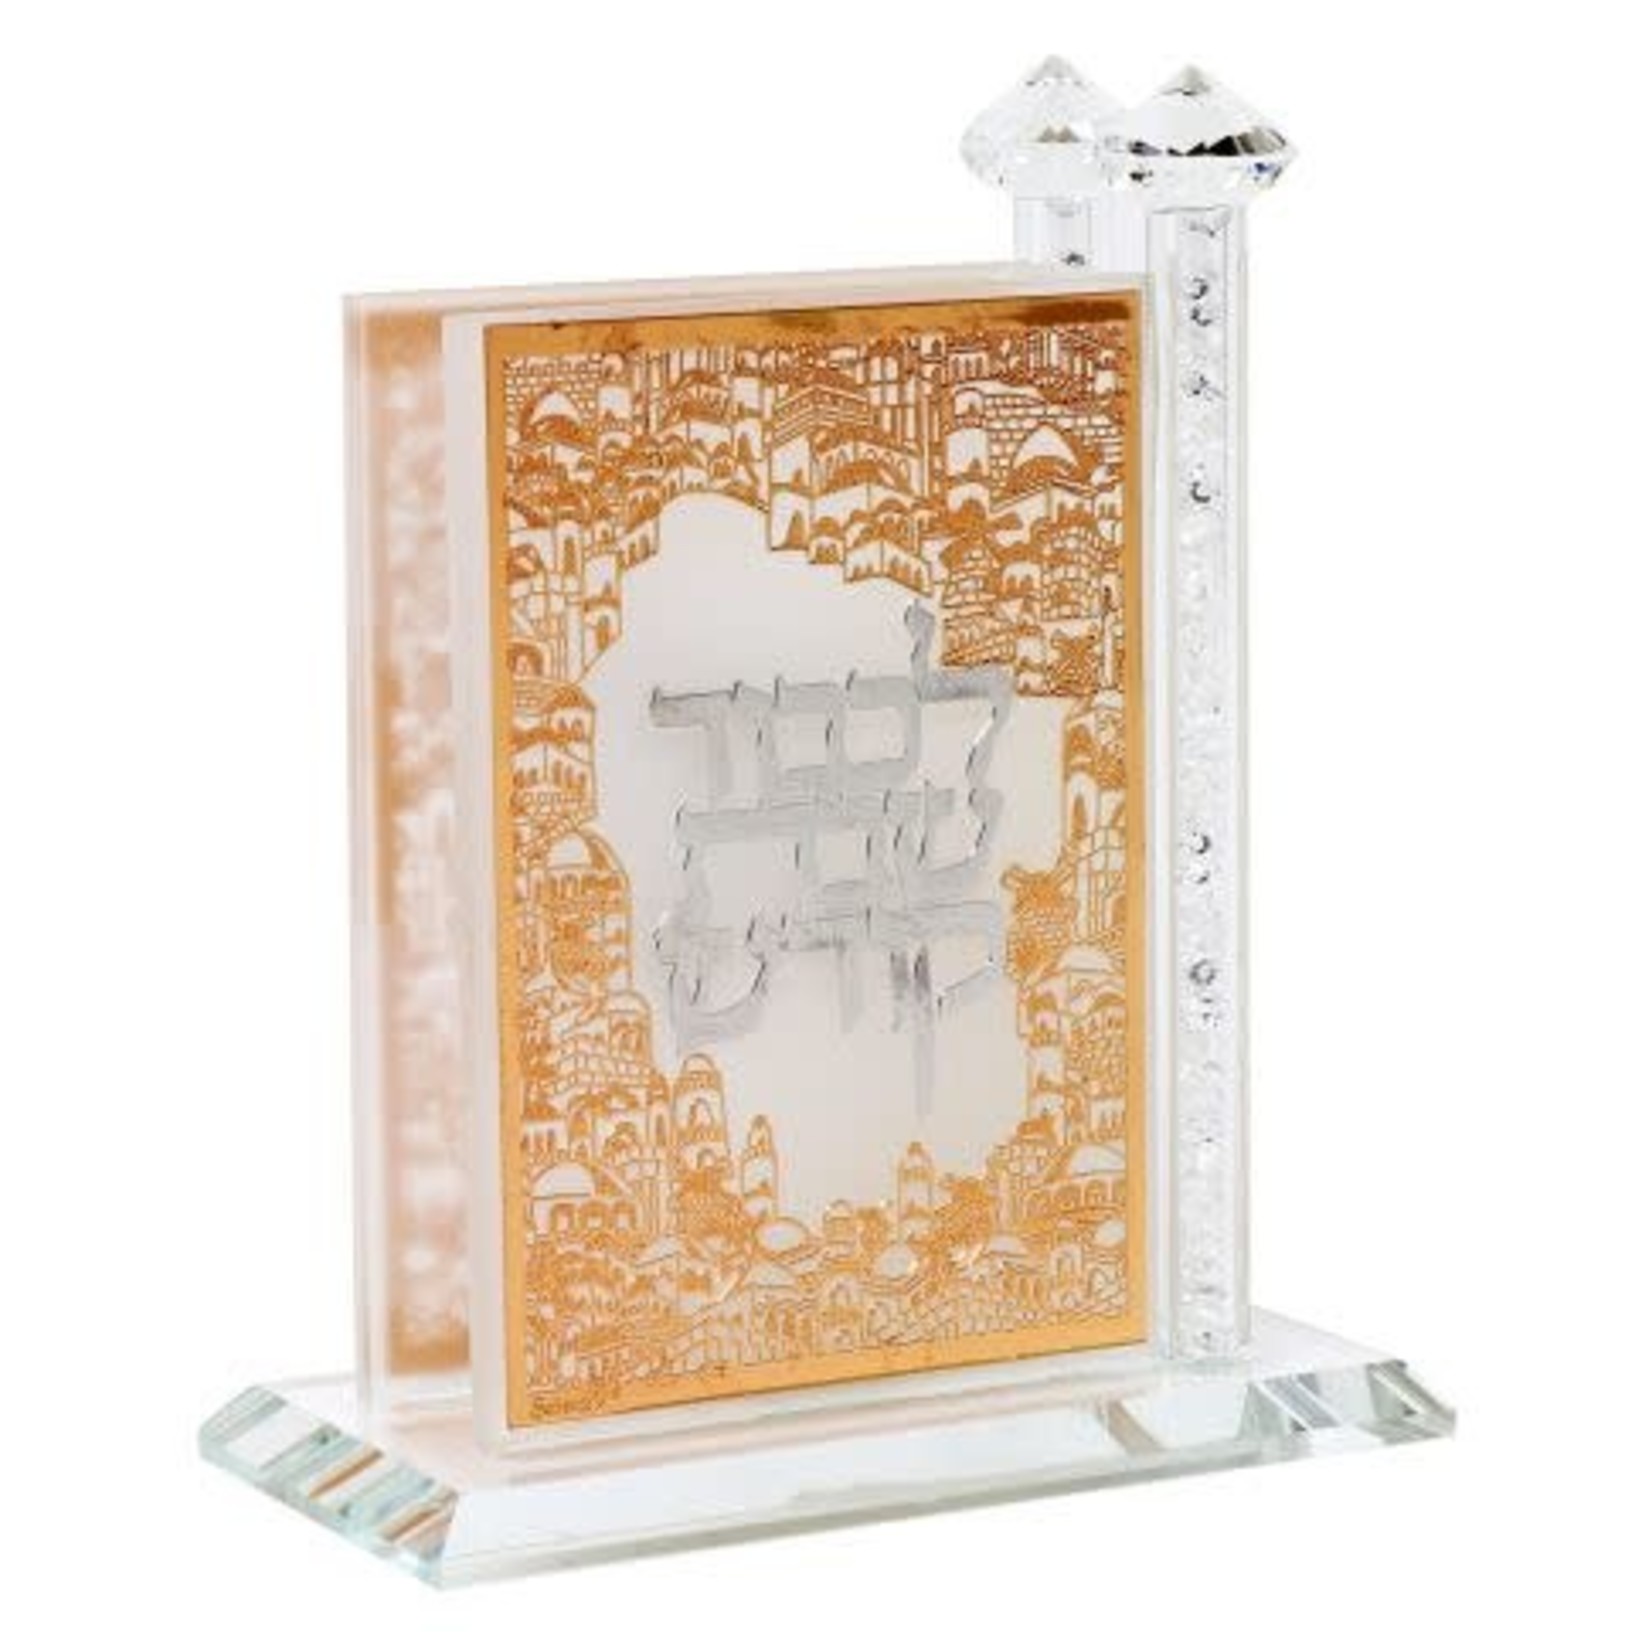 181014 Crystal Match Box Standing Combined Gold and Silver plate